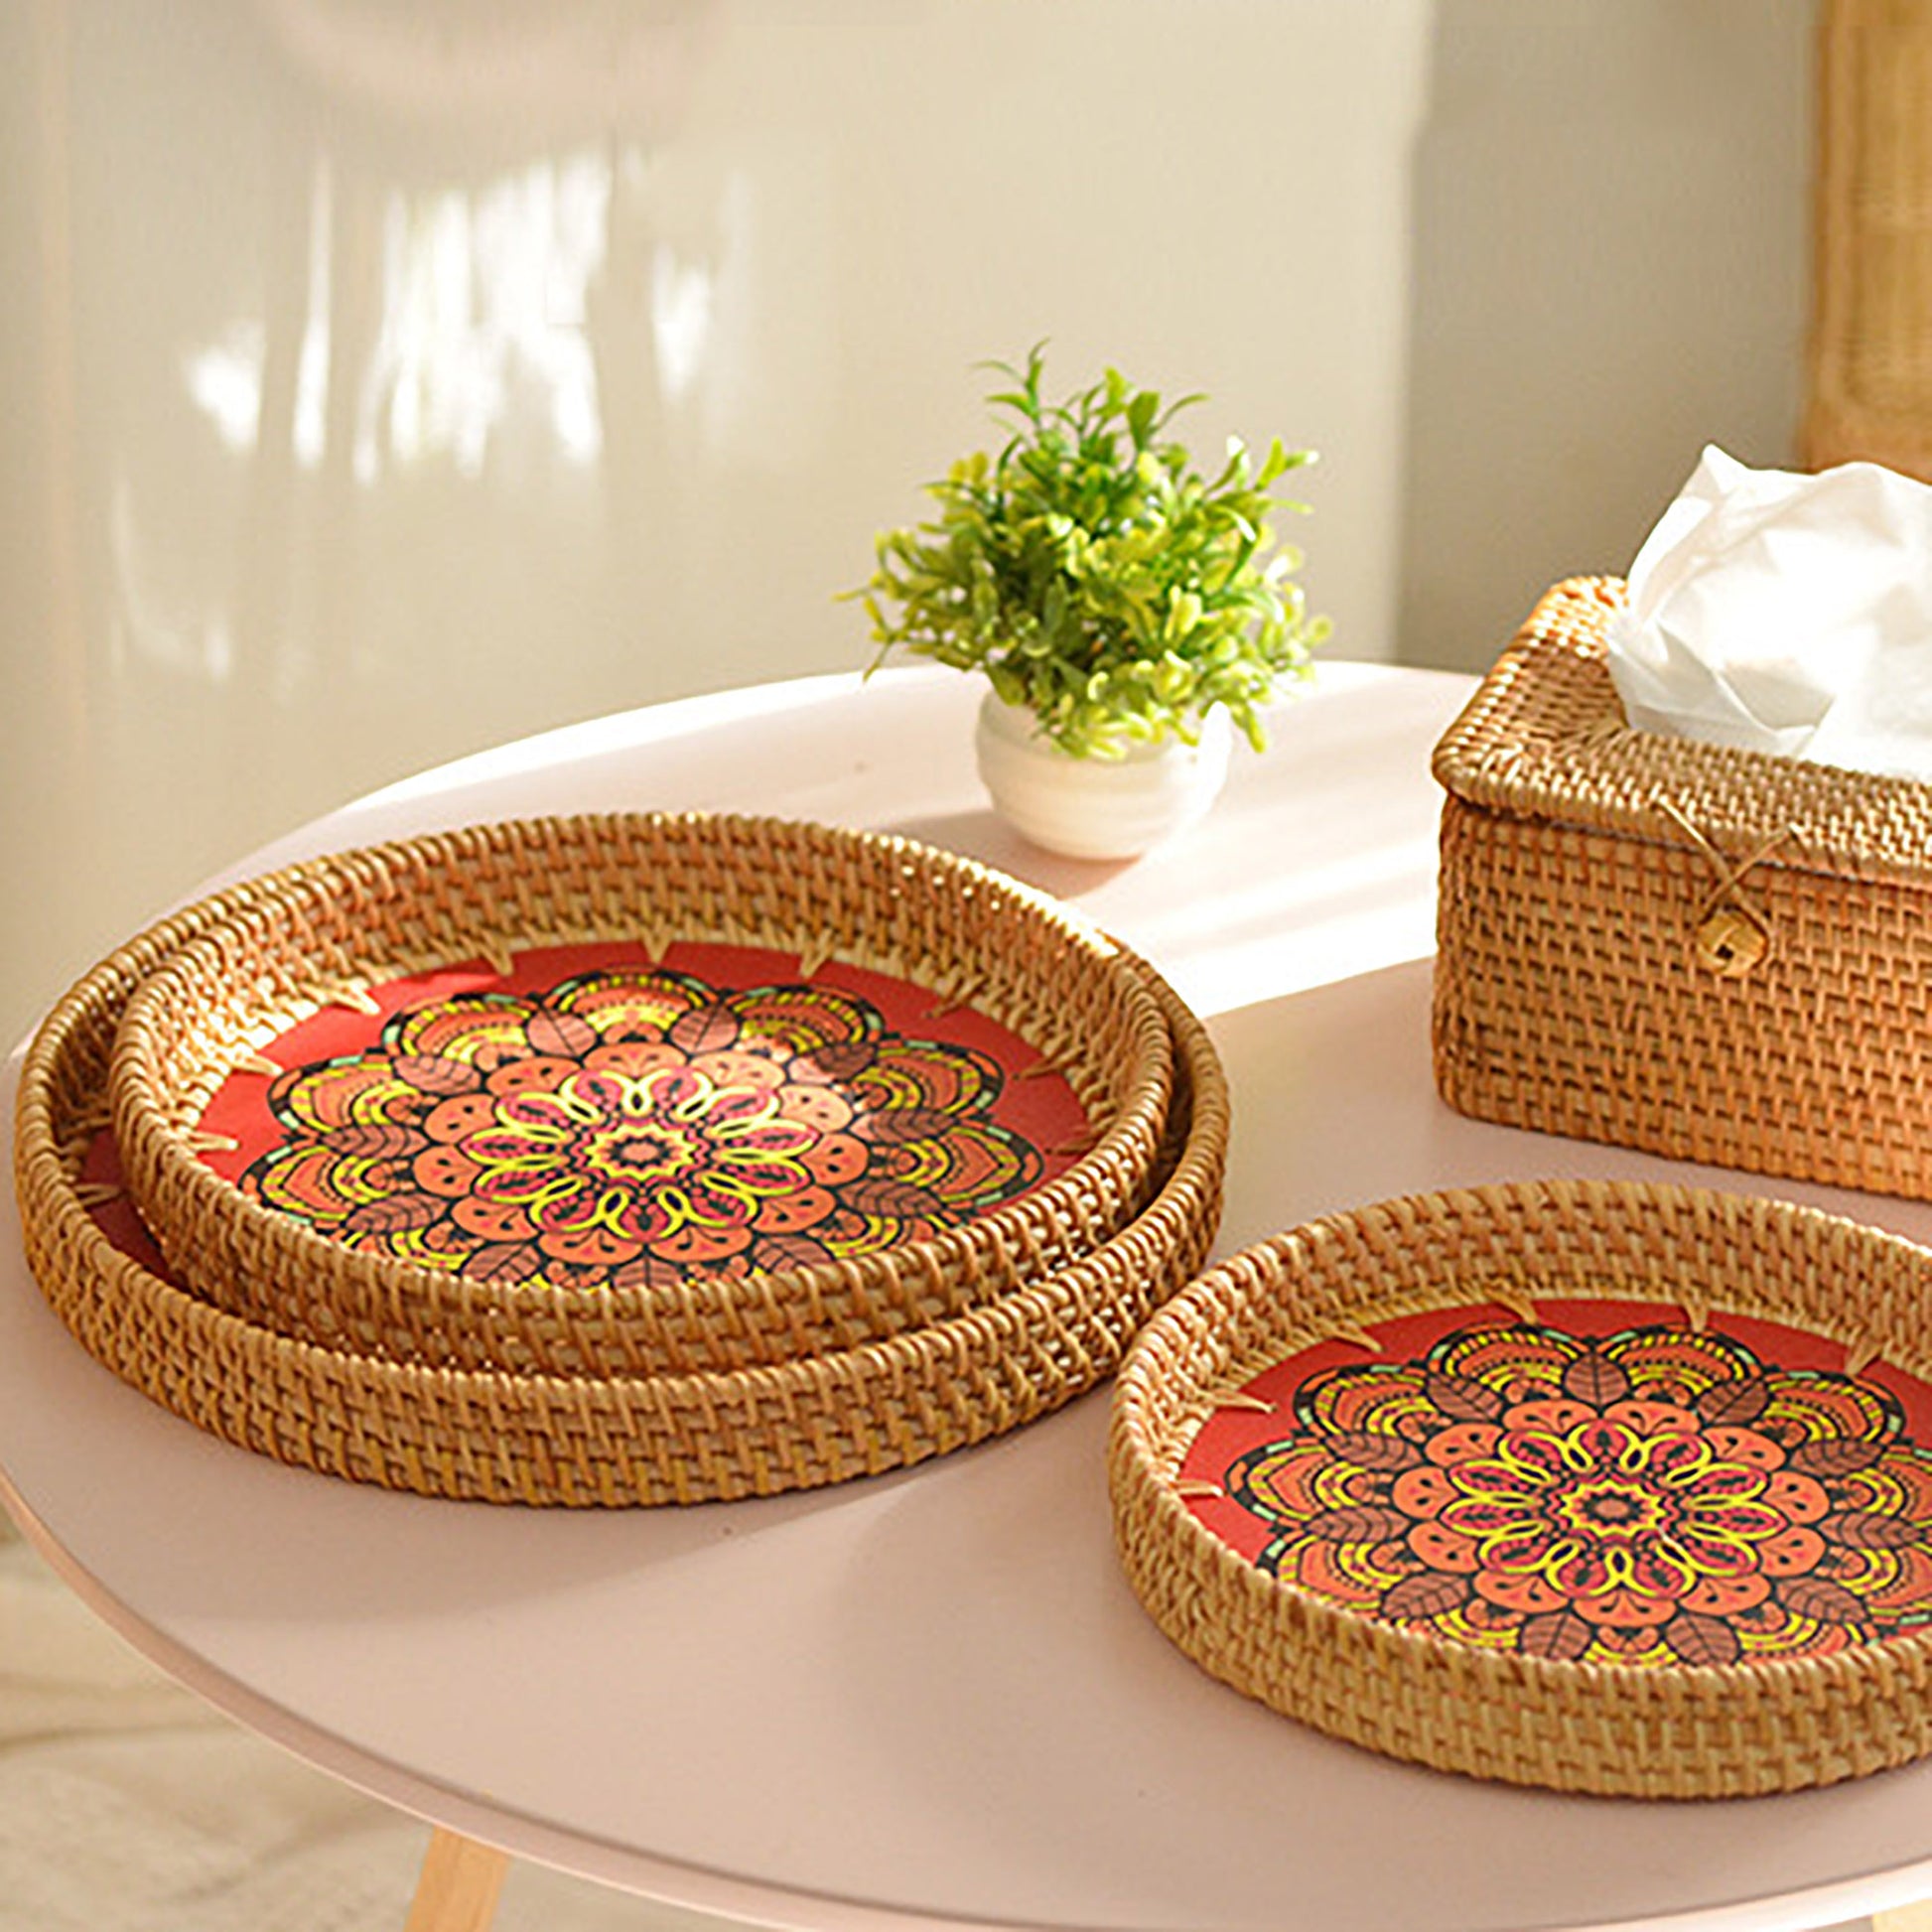 Woven Trays